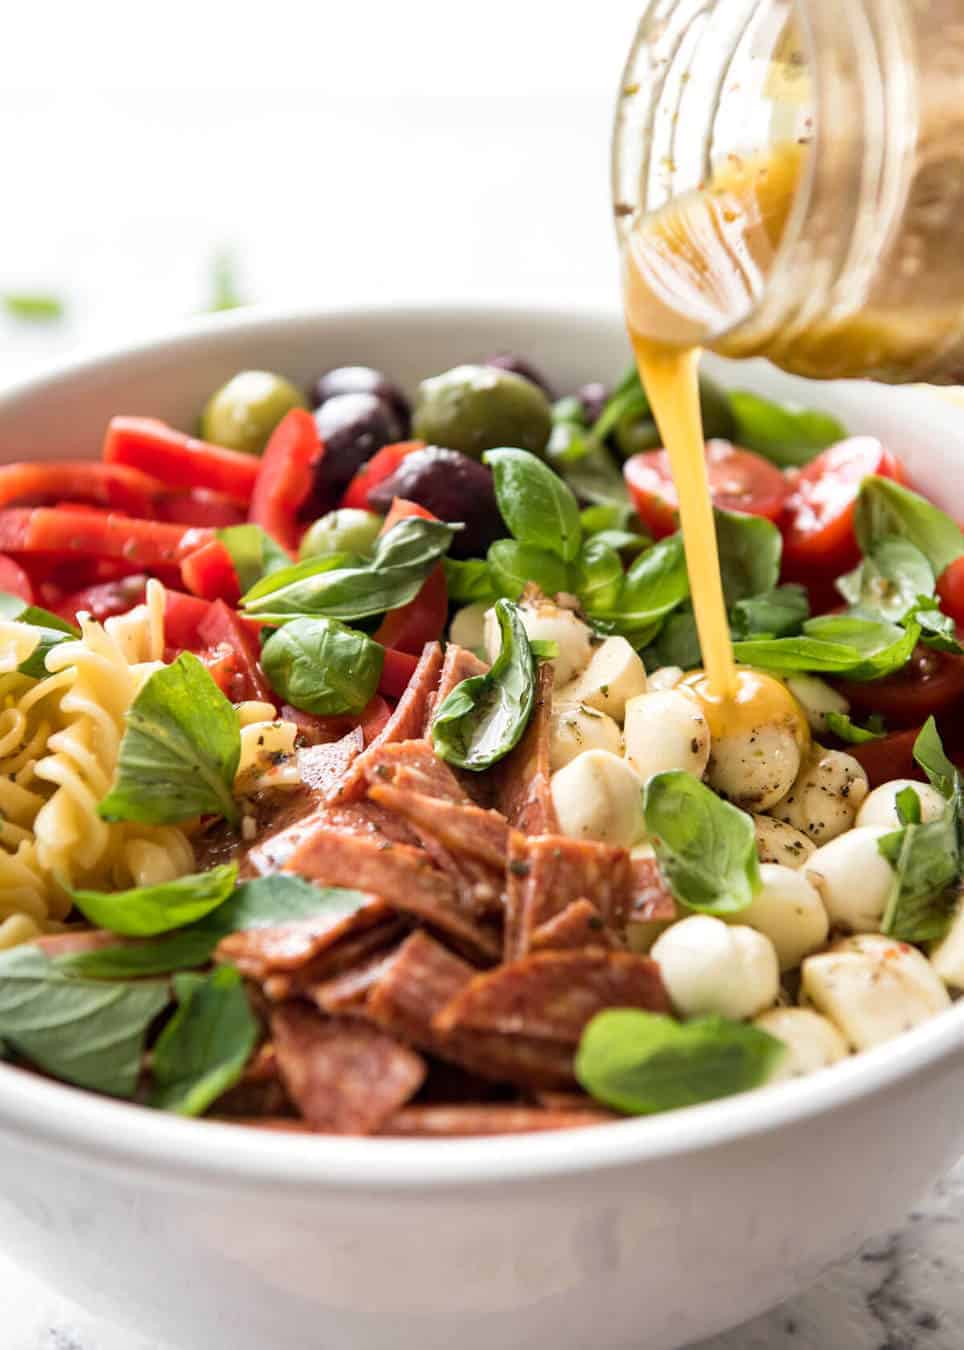 This Italian Pasta Salad with Homemade Italian Dressing is a hit at gatherings! www.recipetineats.com